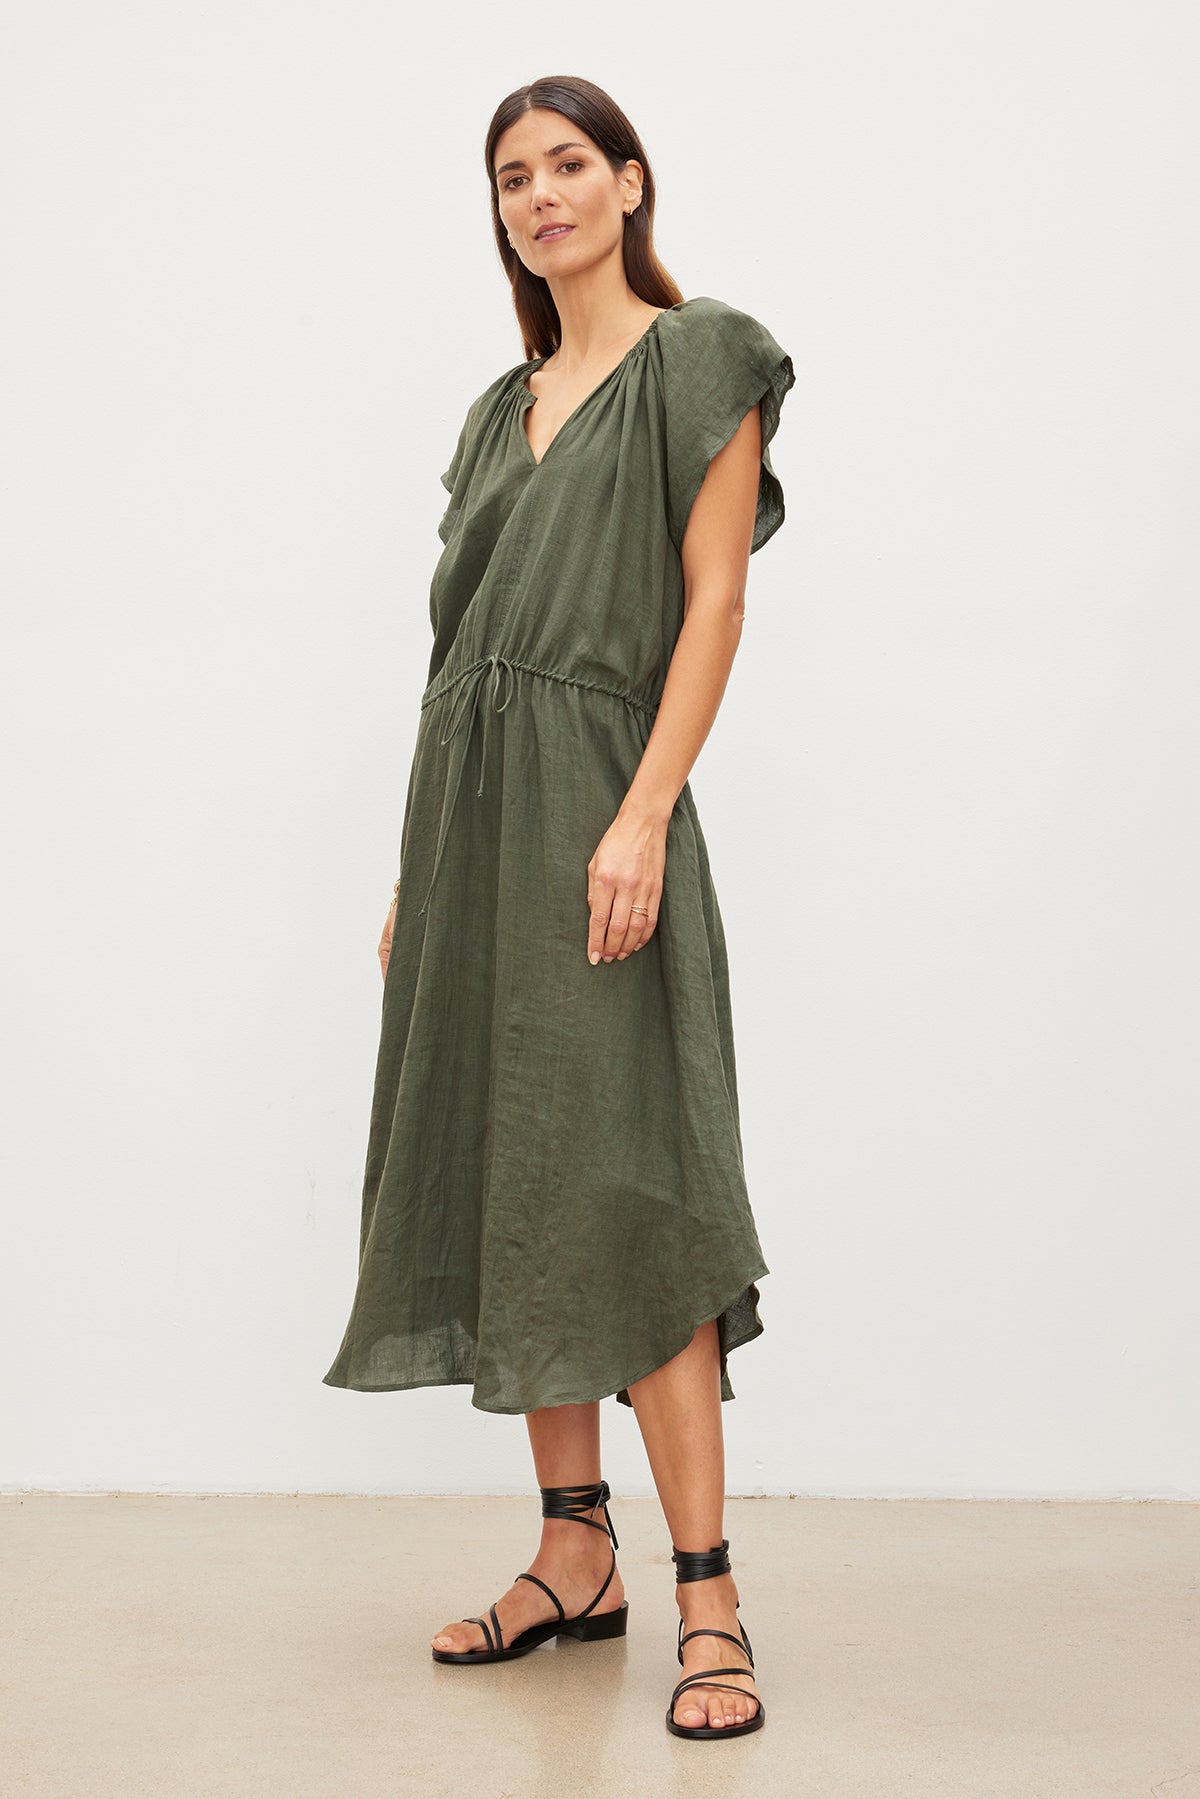 A woman in a Velvet by Graham & Spencer Pepper Linen V-Neck Dress with a v-neckline and ruffled sleeves, paired with black strappy sandals, standing in a studio setting.-35967692144833